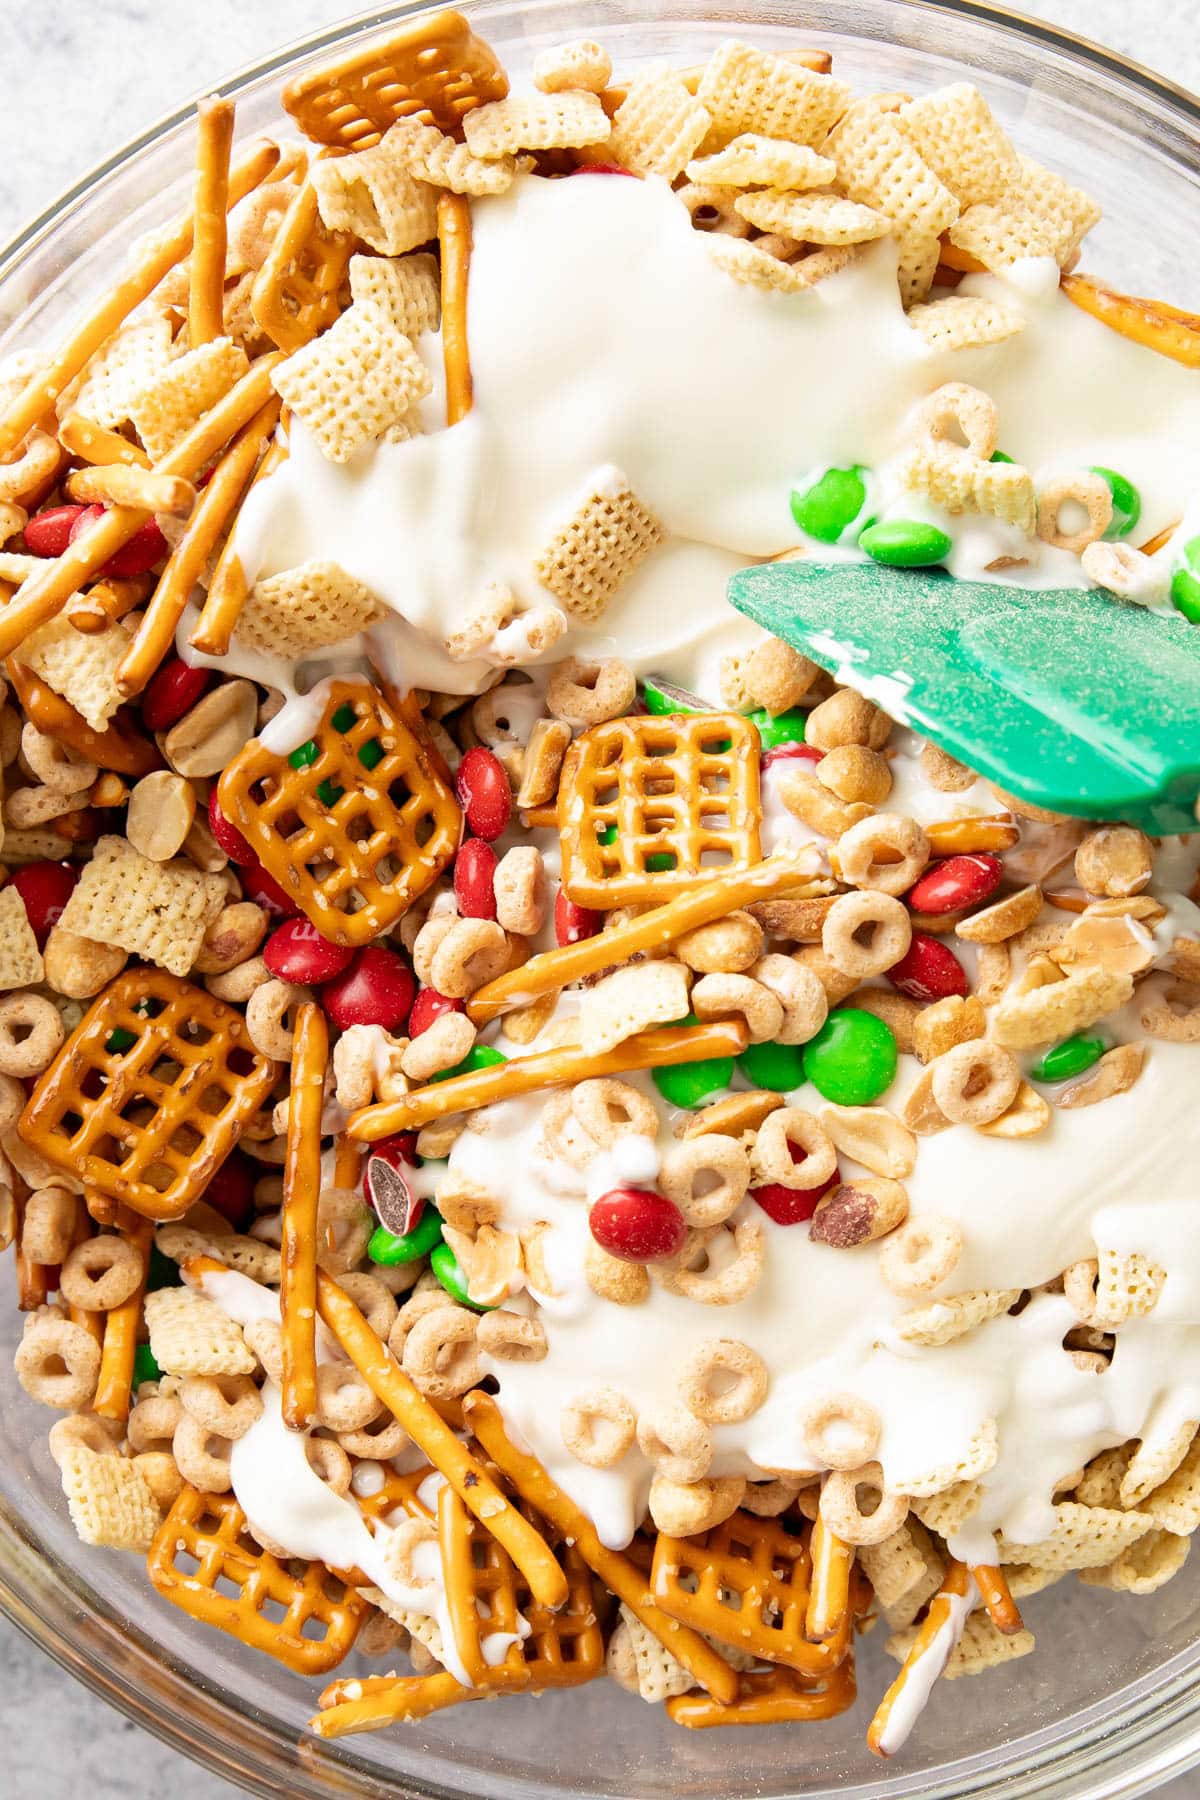 Close up of green spatula stirring white chocolate throughout bowl of chex mix, pretzels, M&M’s and more to coat